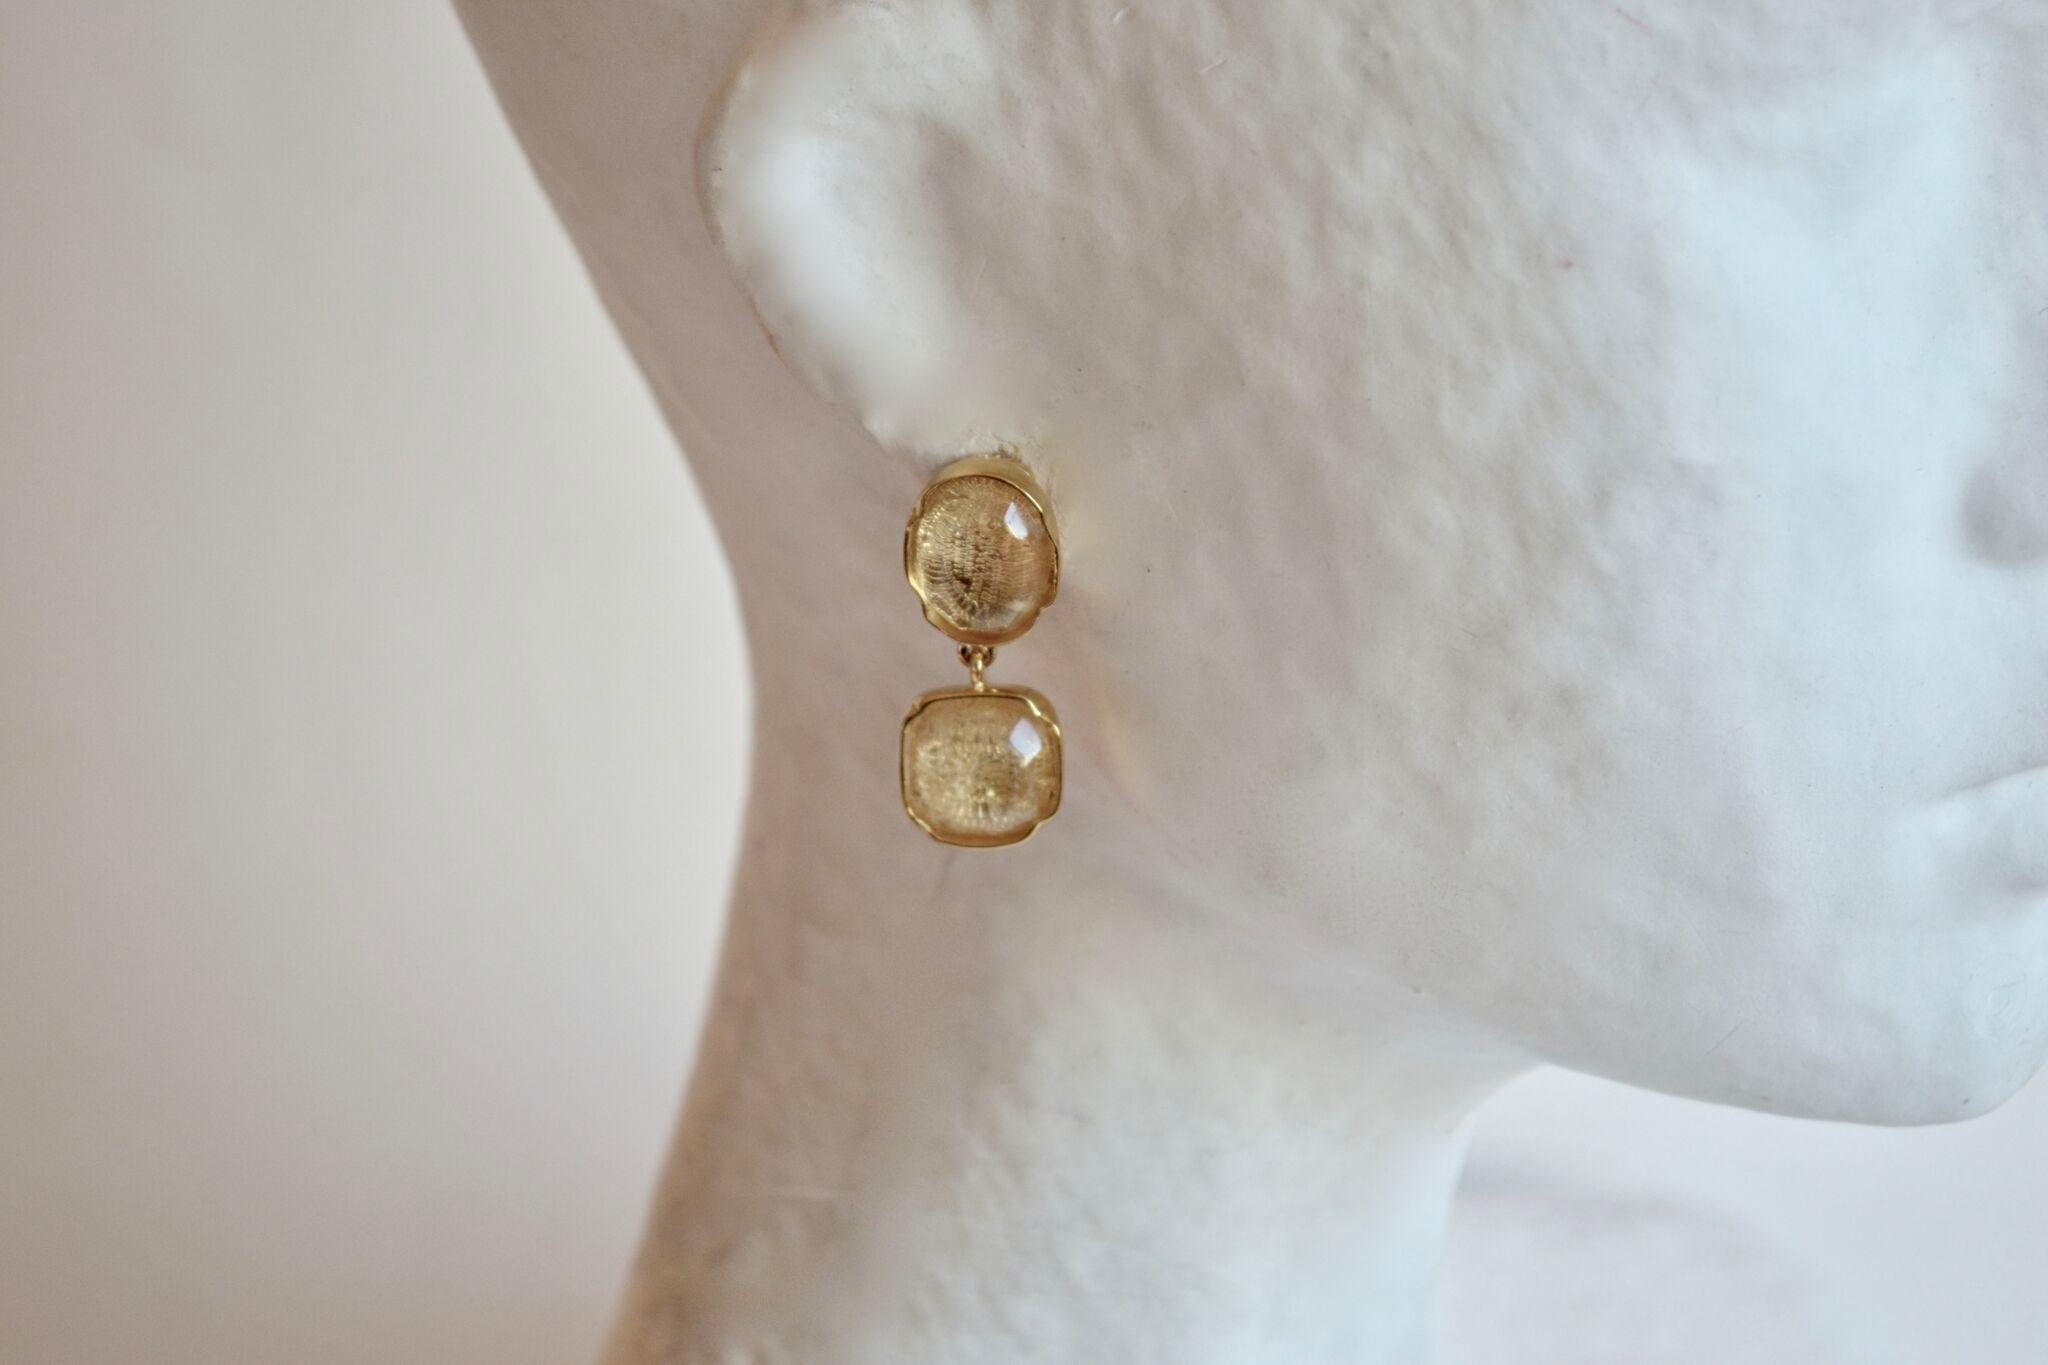 Clear rock crystal clip earrings from Goossens Paris' Fall 2018 collection. 

1.5